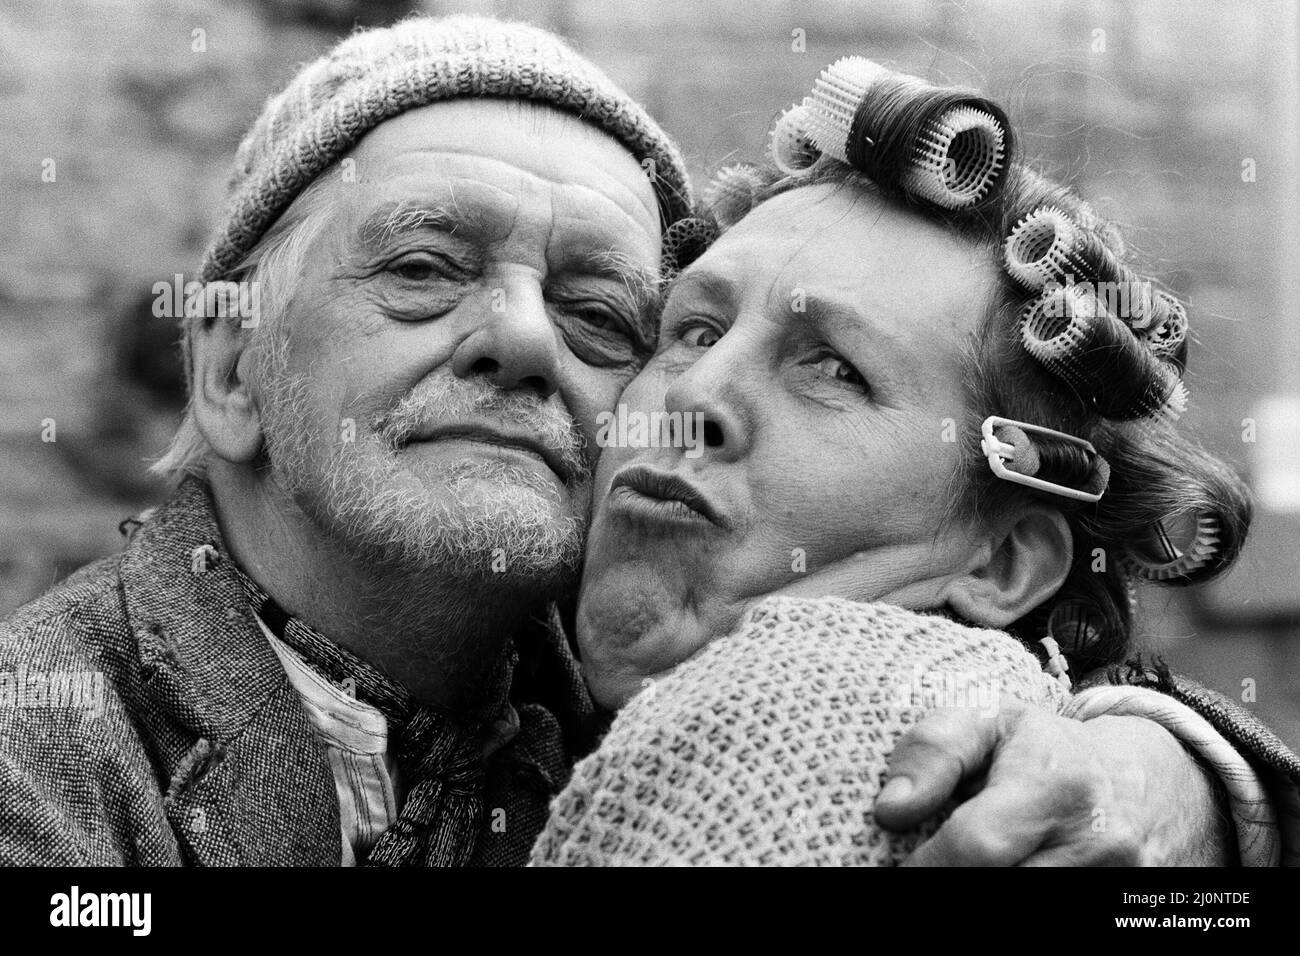 Bill Owen (Compo) and Kathy Staff (Nora Batty) on the set of 'Last of the Summer Wine'. 27th May 1983. Stock Photo